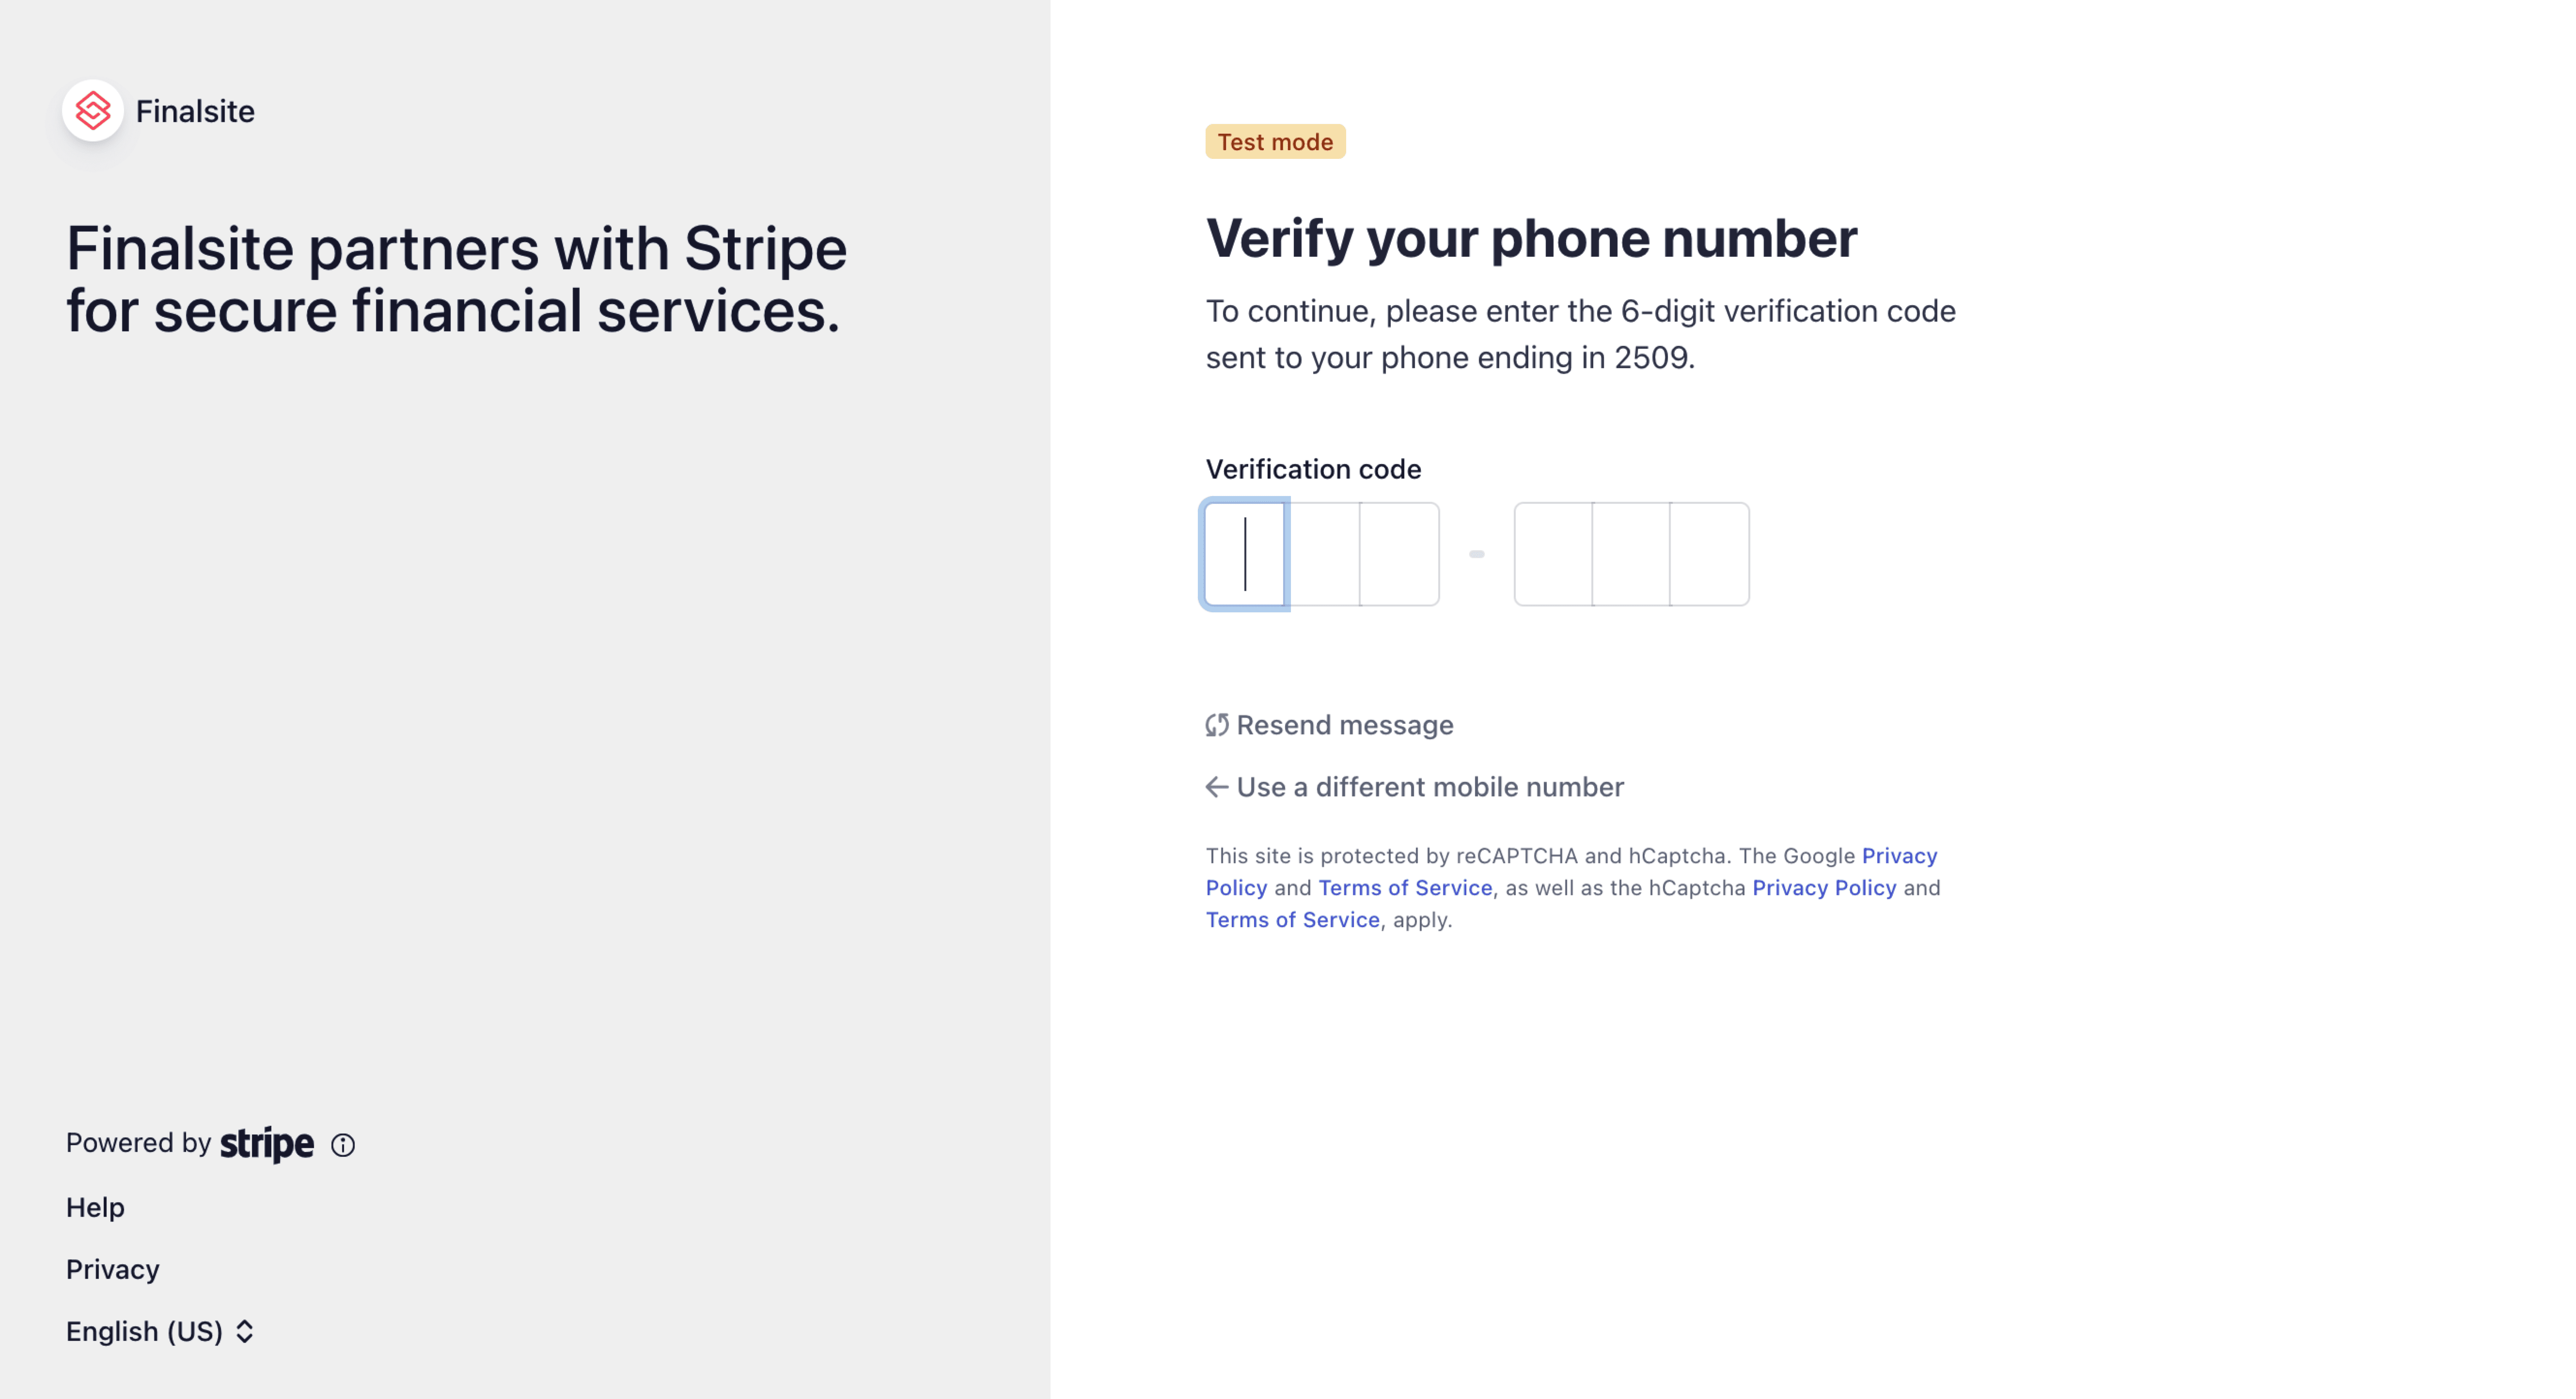 Once you enter your phone number,this is the page you will see asking for the confirmation code.